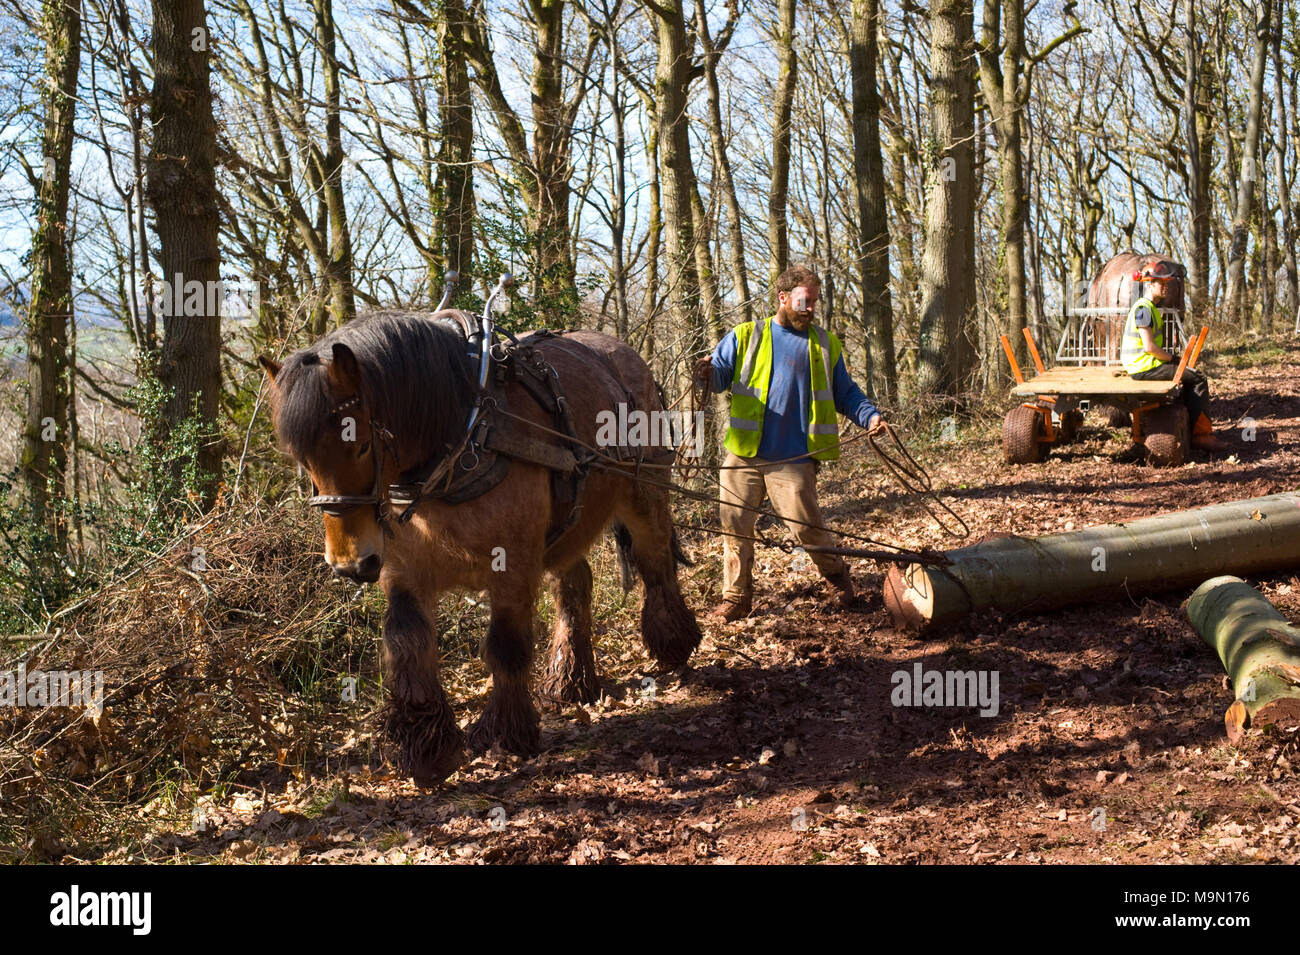 Horse logging in a beech woodland near Talgarth Powys Wales UK. Horses are used to pull logs out of difficult terrain inaccessible for vehicles. Stock Photo